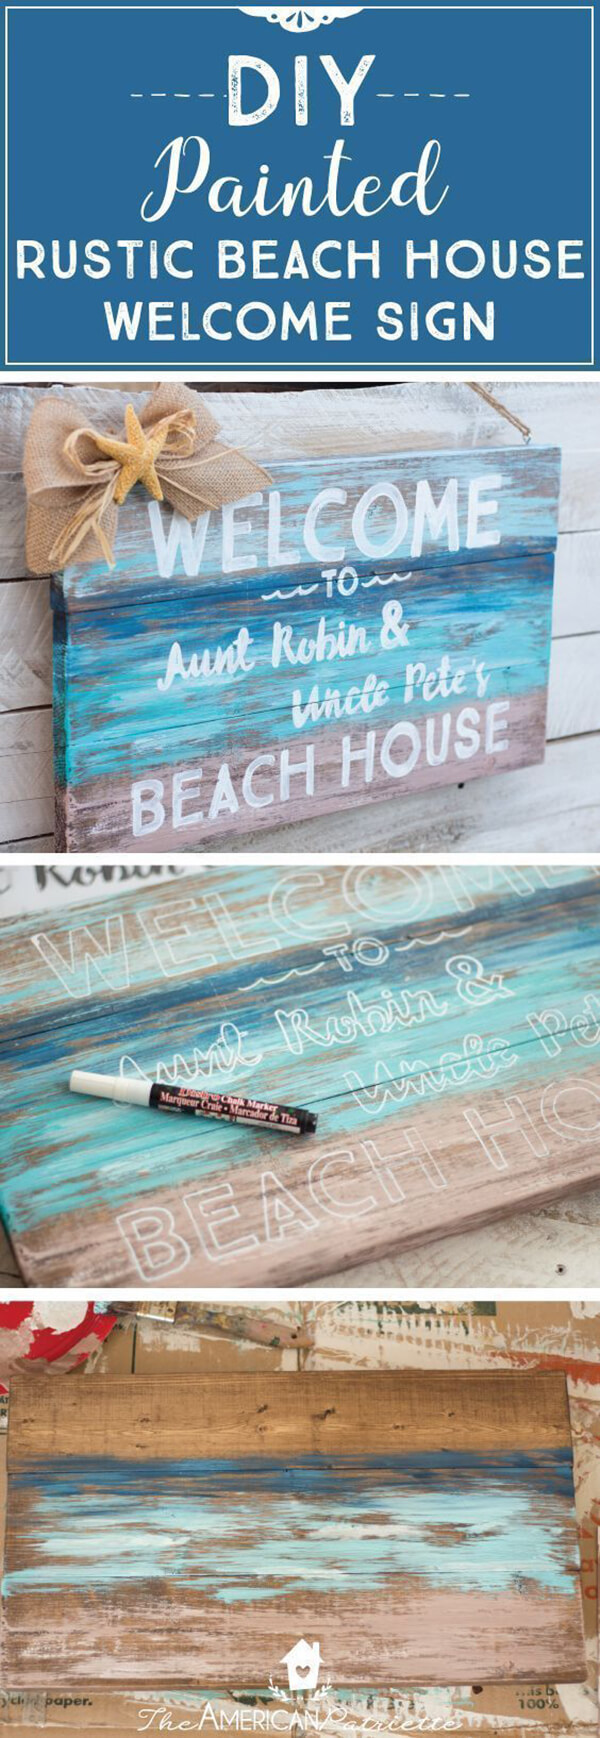 Make Your Own Distressed Lettered Sign